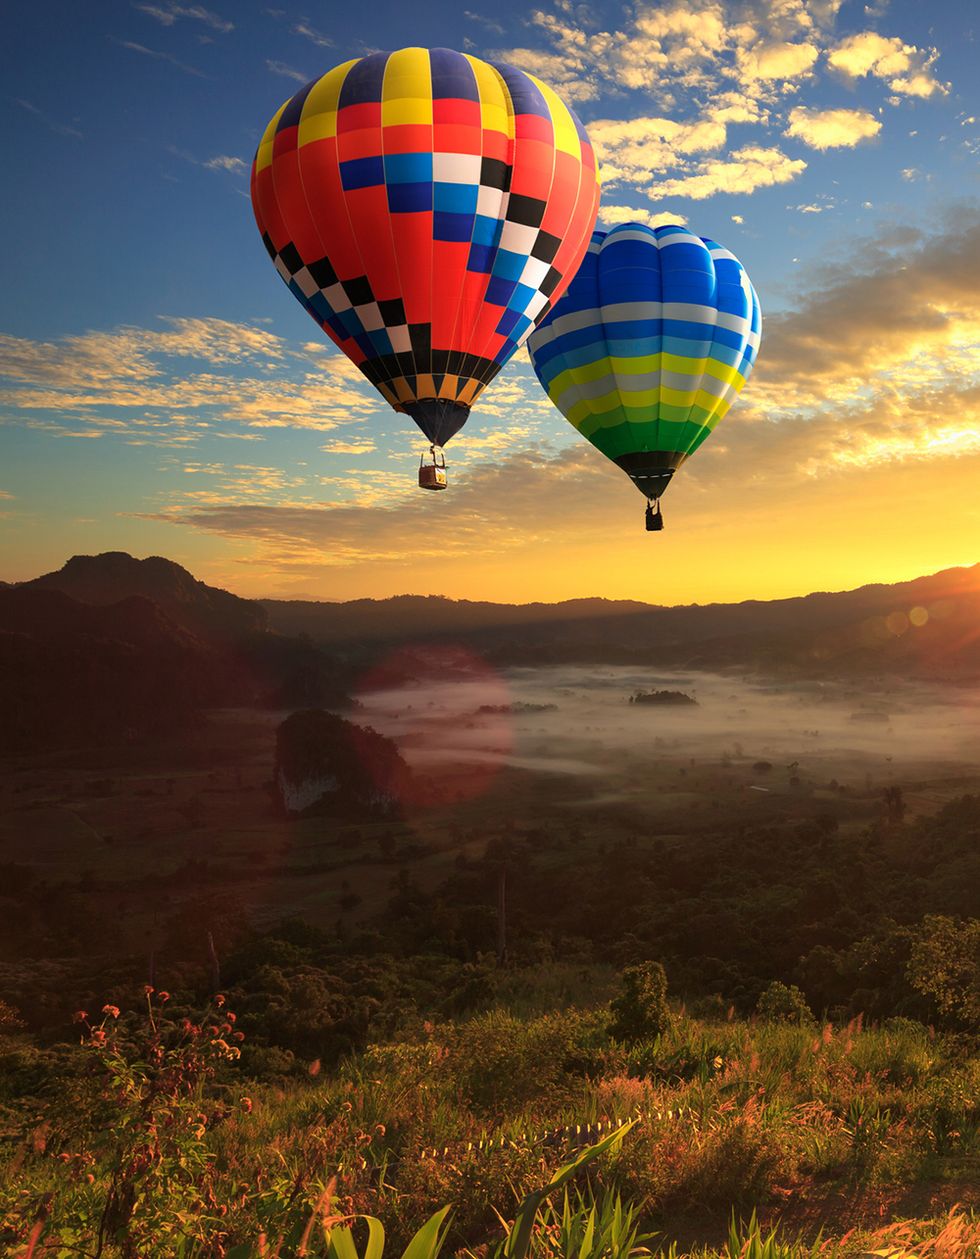 two hot air balloons rising over beautiful natural scenery fall date ideas